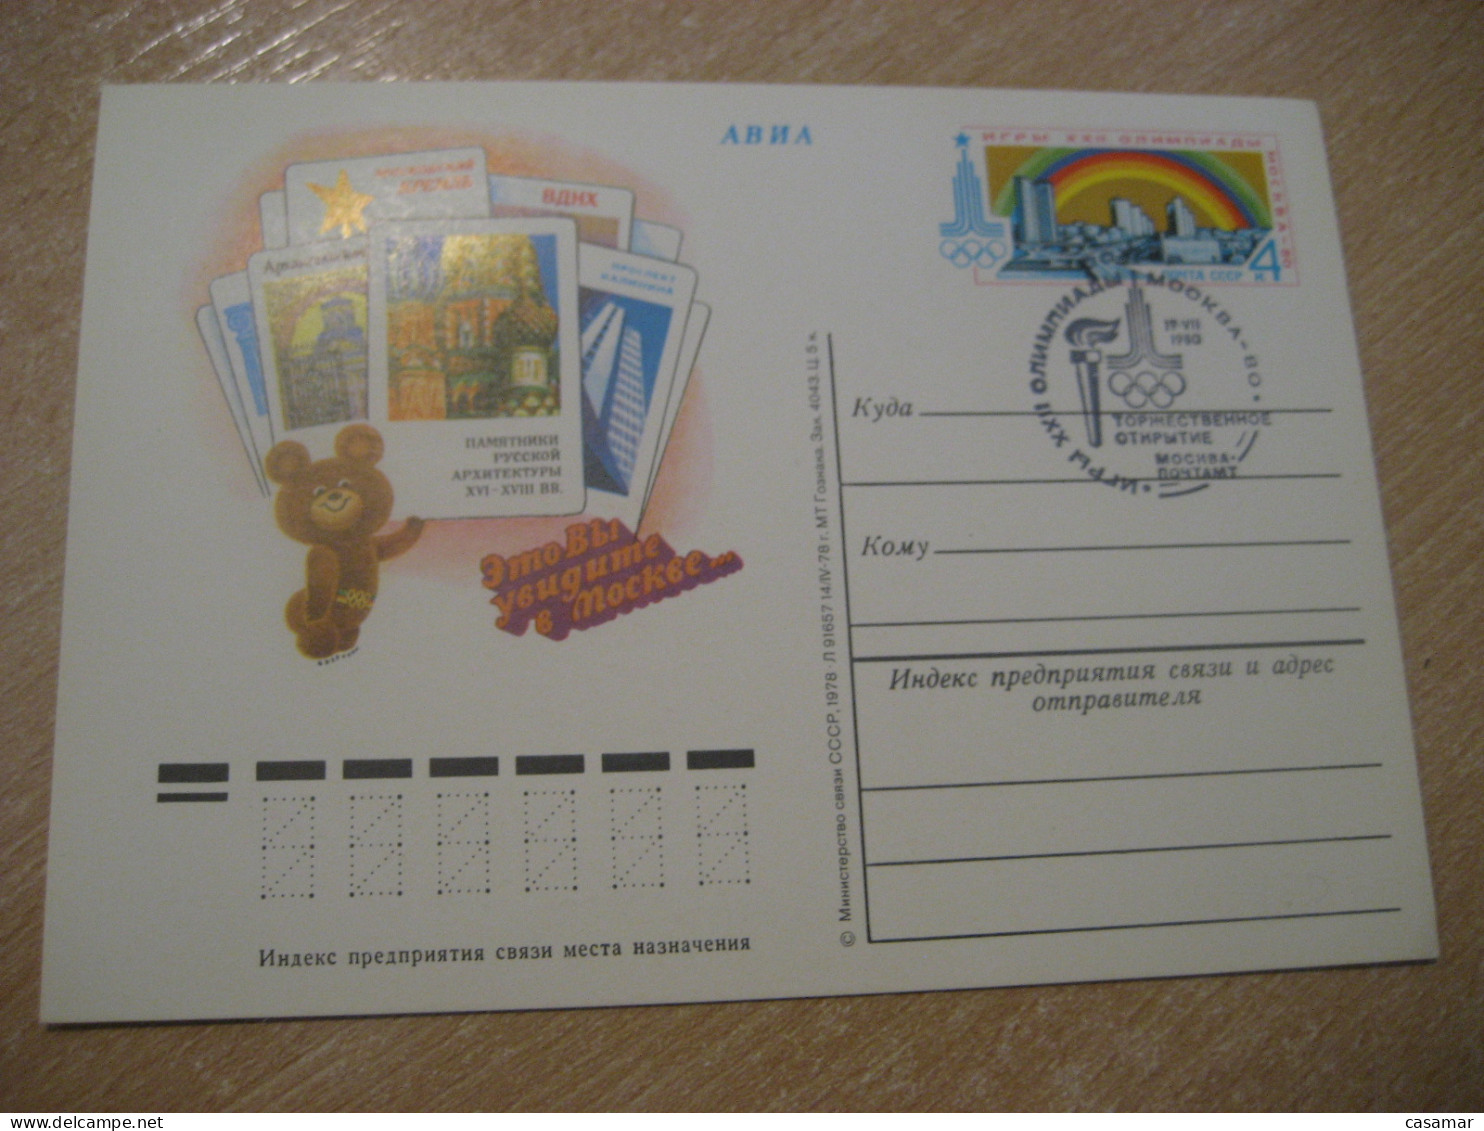 1980 Olympic Mascot Moscow Olympic Games Olympics Torch Cancel Postal Stationery Card RUSSIA USSR - Summer 1980: Moscow